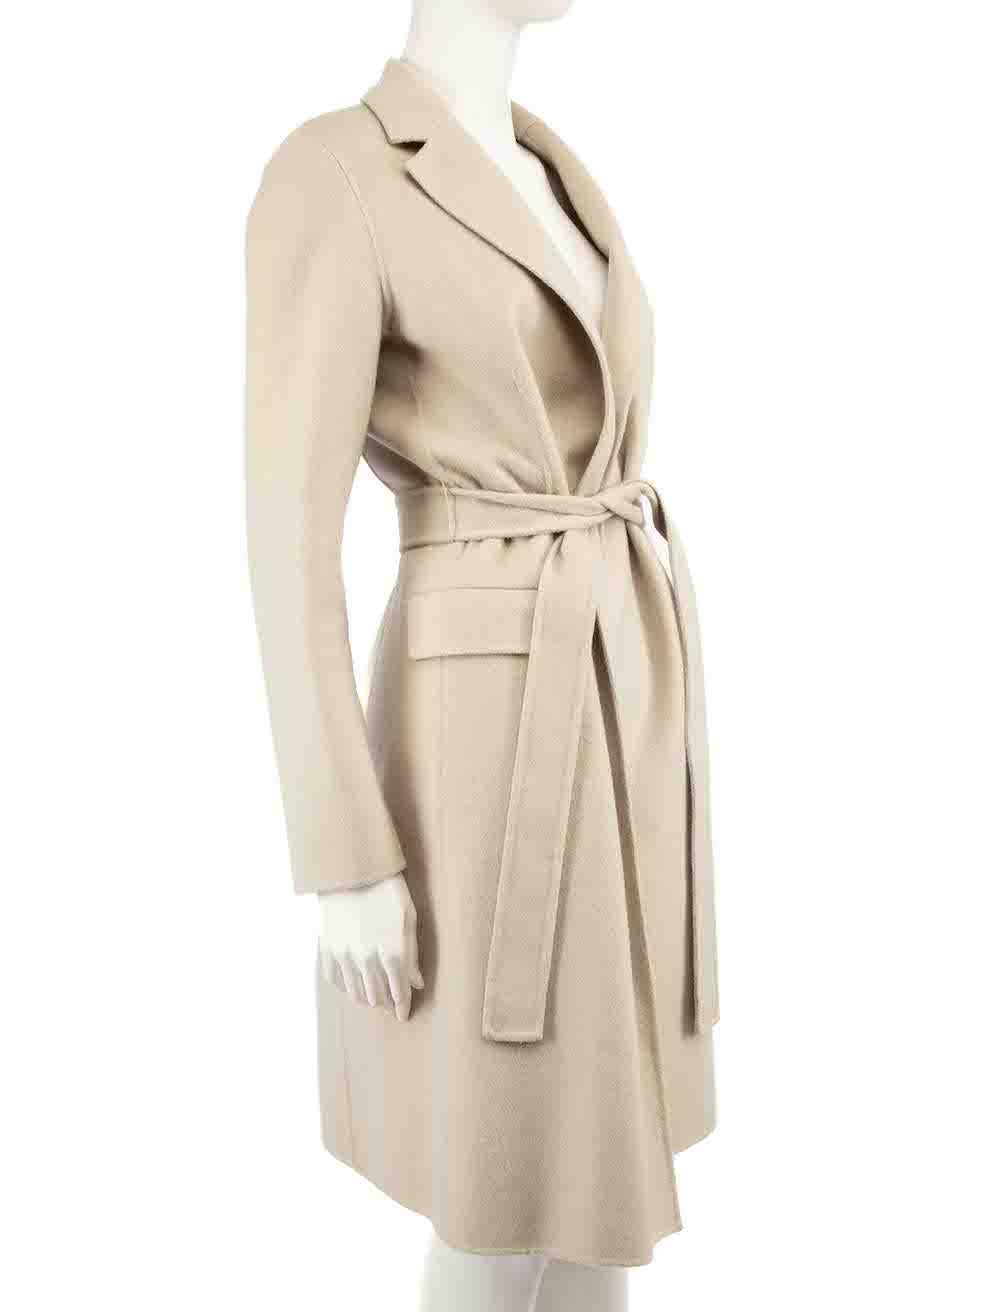 CONDITION is Very good. Hardly any visible wear to coat is evident on this used Theory designer resale item.
 
 Details
 Beige
 Wool
 Coat
 Belt tie fastening
 2x Front pockets
 
 
 Made in China
 
 Composition
 90% Wool, 10% Cashmere
 
 Care